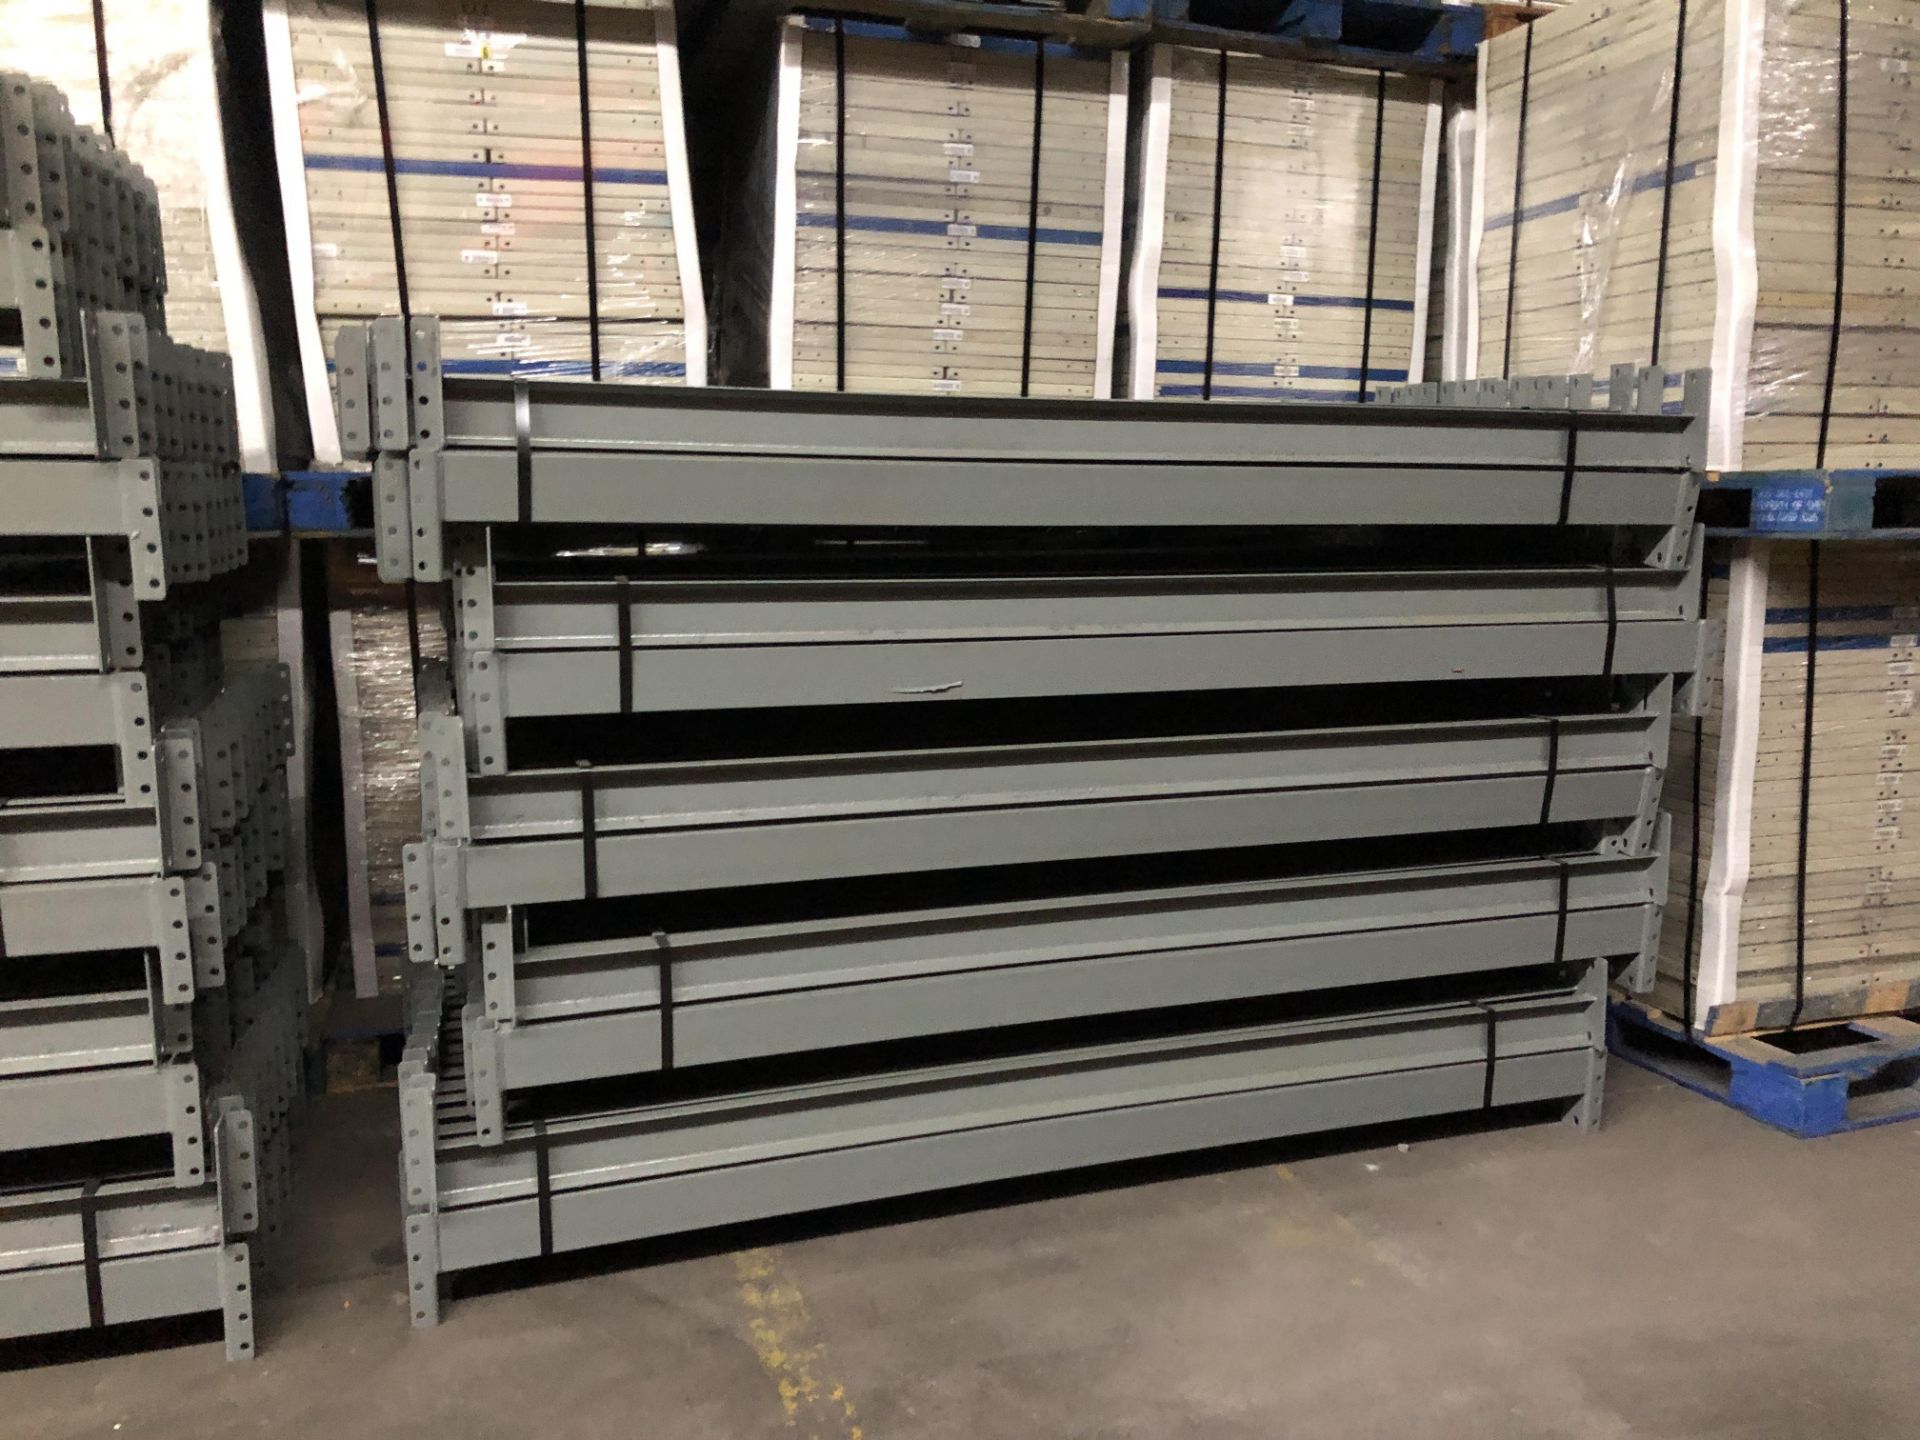 14 BAYS OF 10.5'H X 42"D X 93"L STRUCTURAL STYLE PALLET RACKS - Image 5 of 6